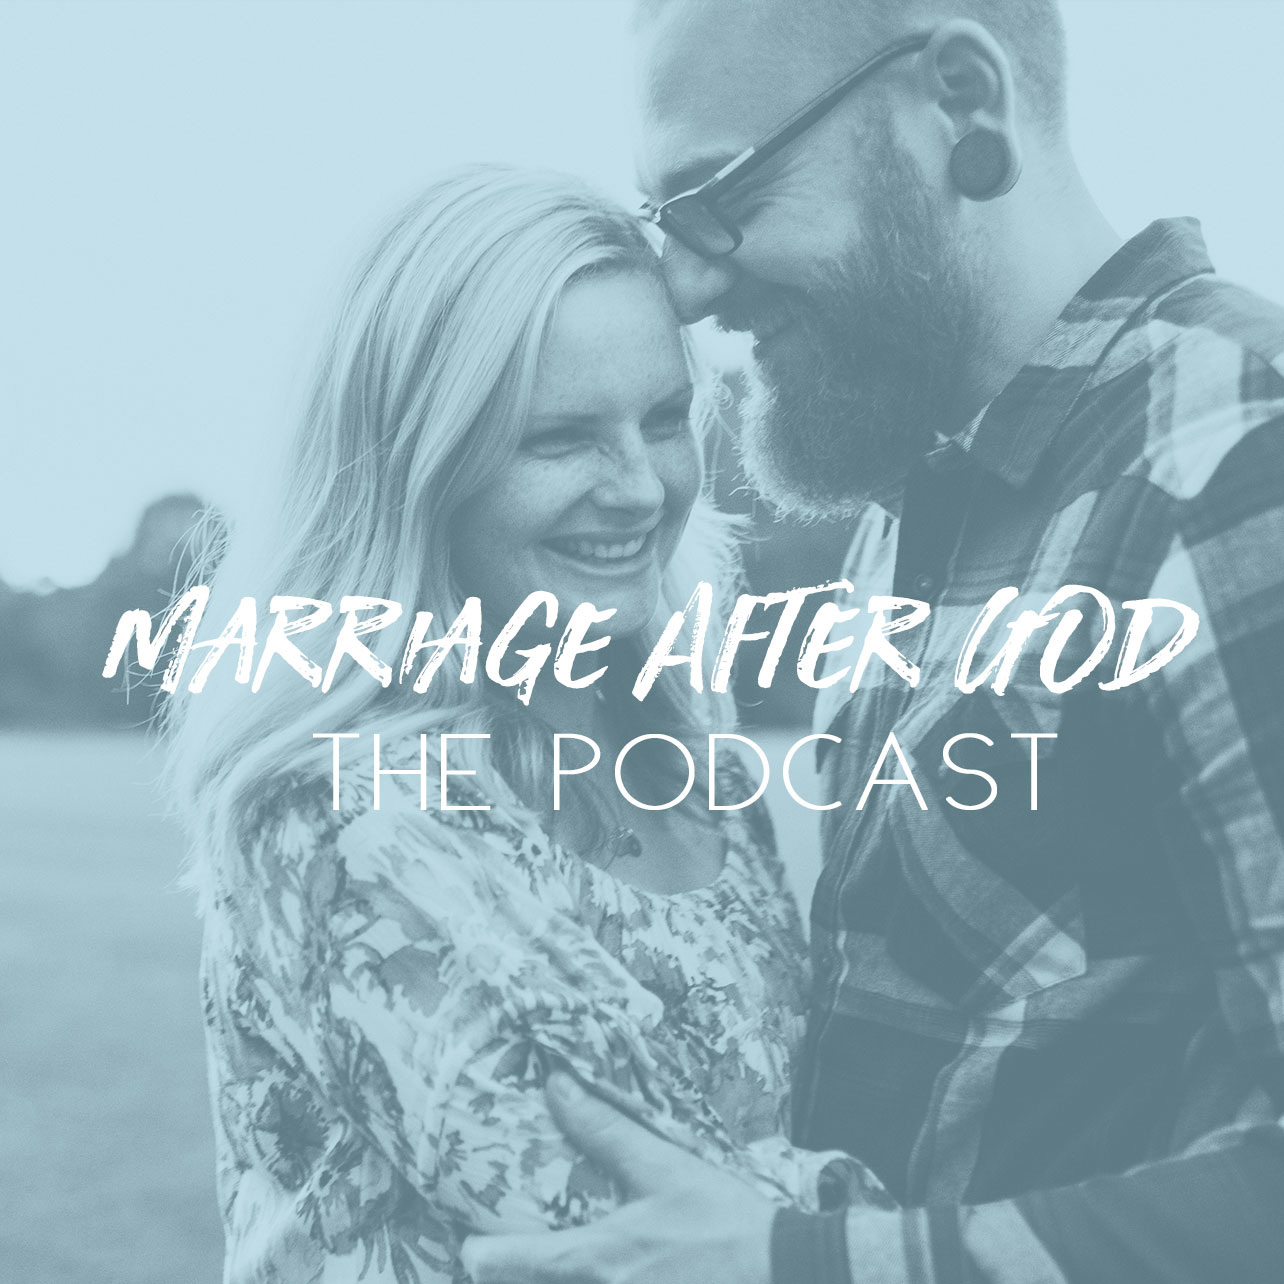 Marriage After God: The Podcast